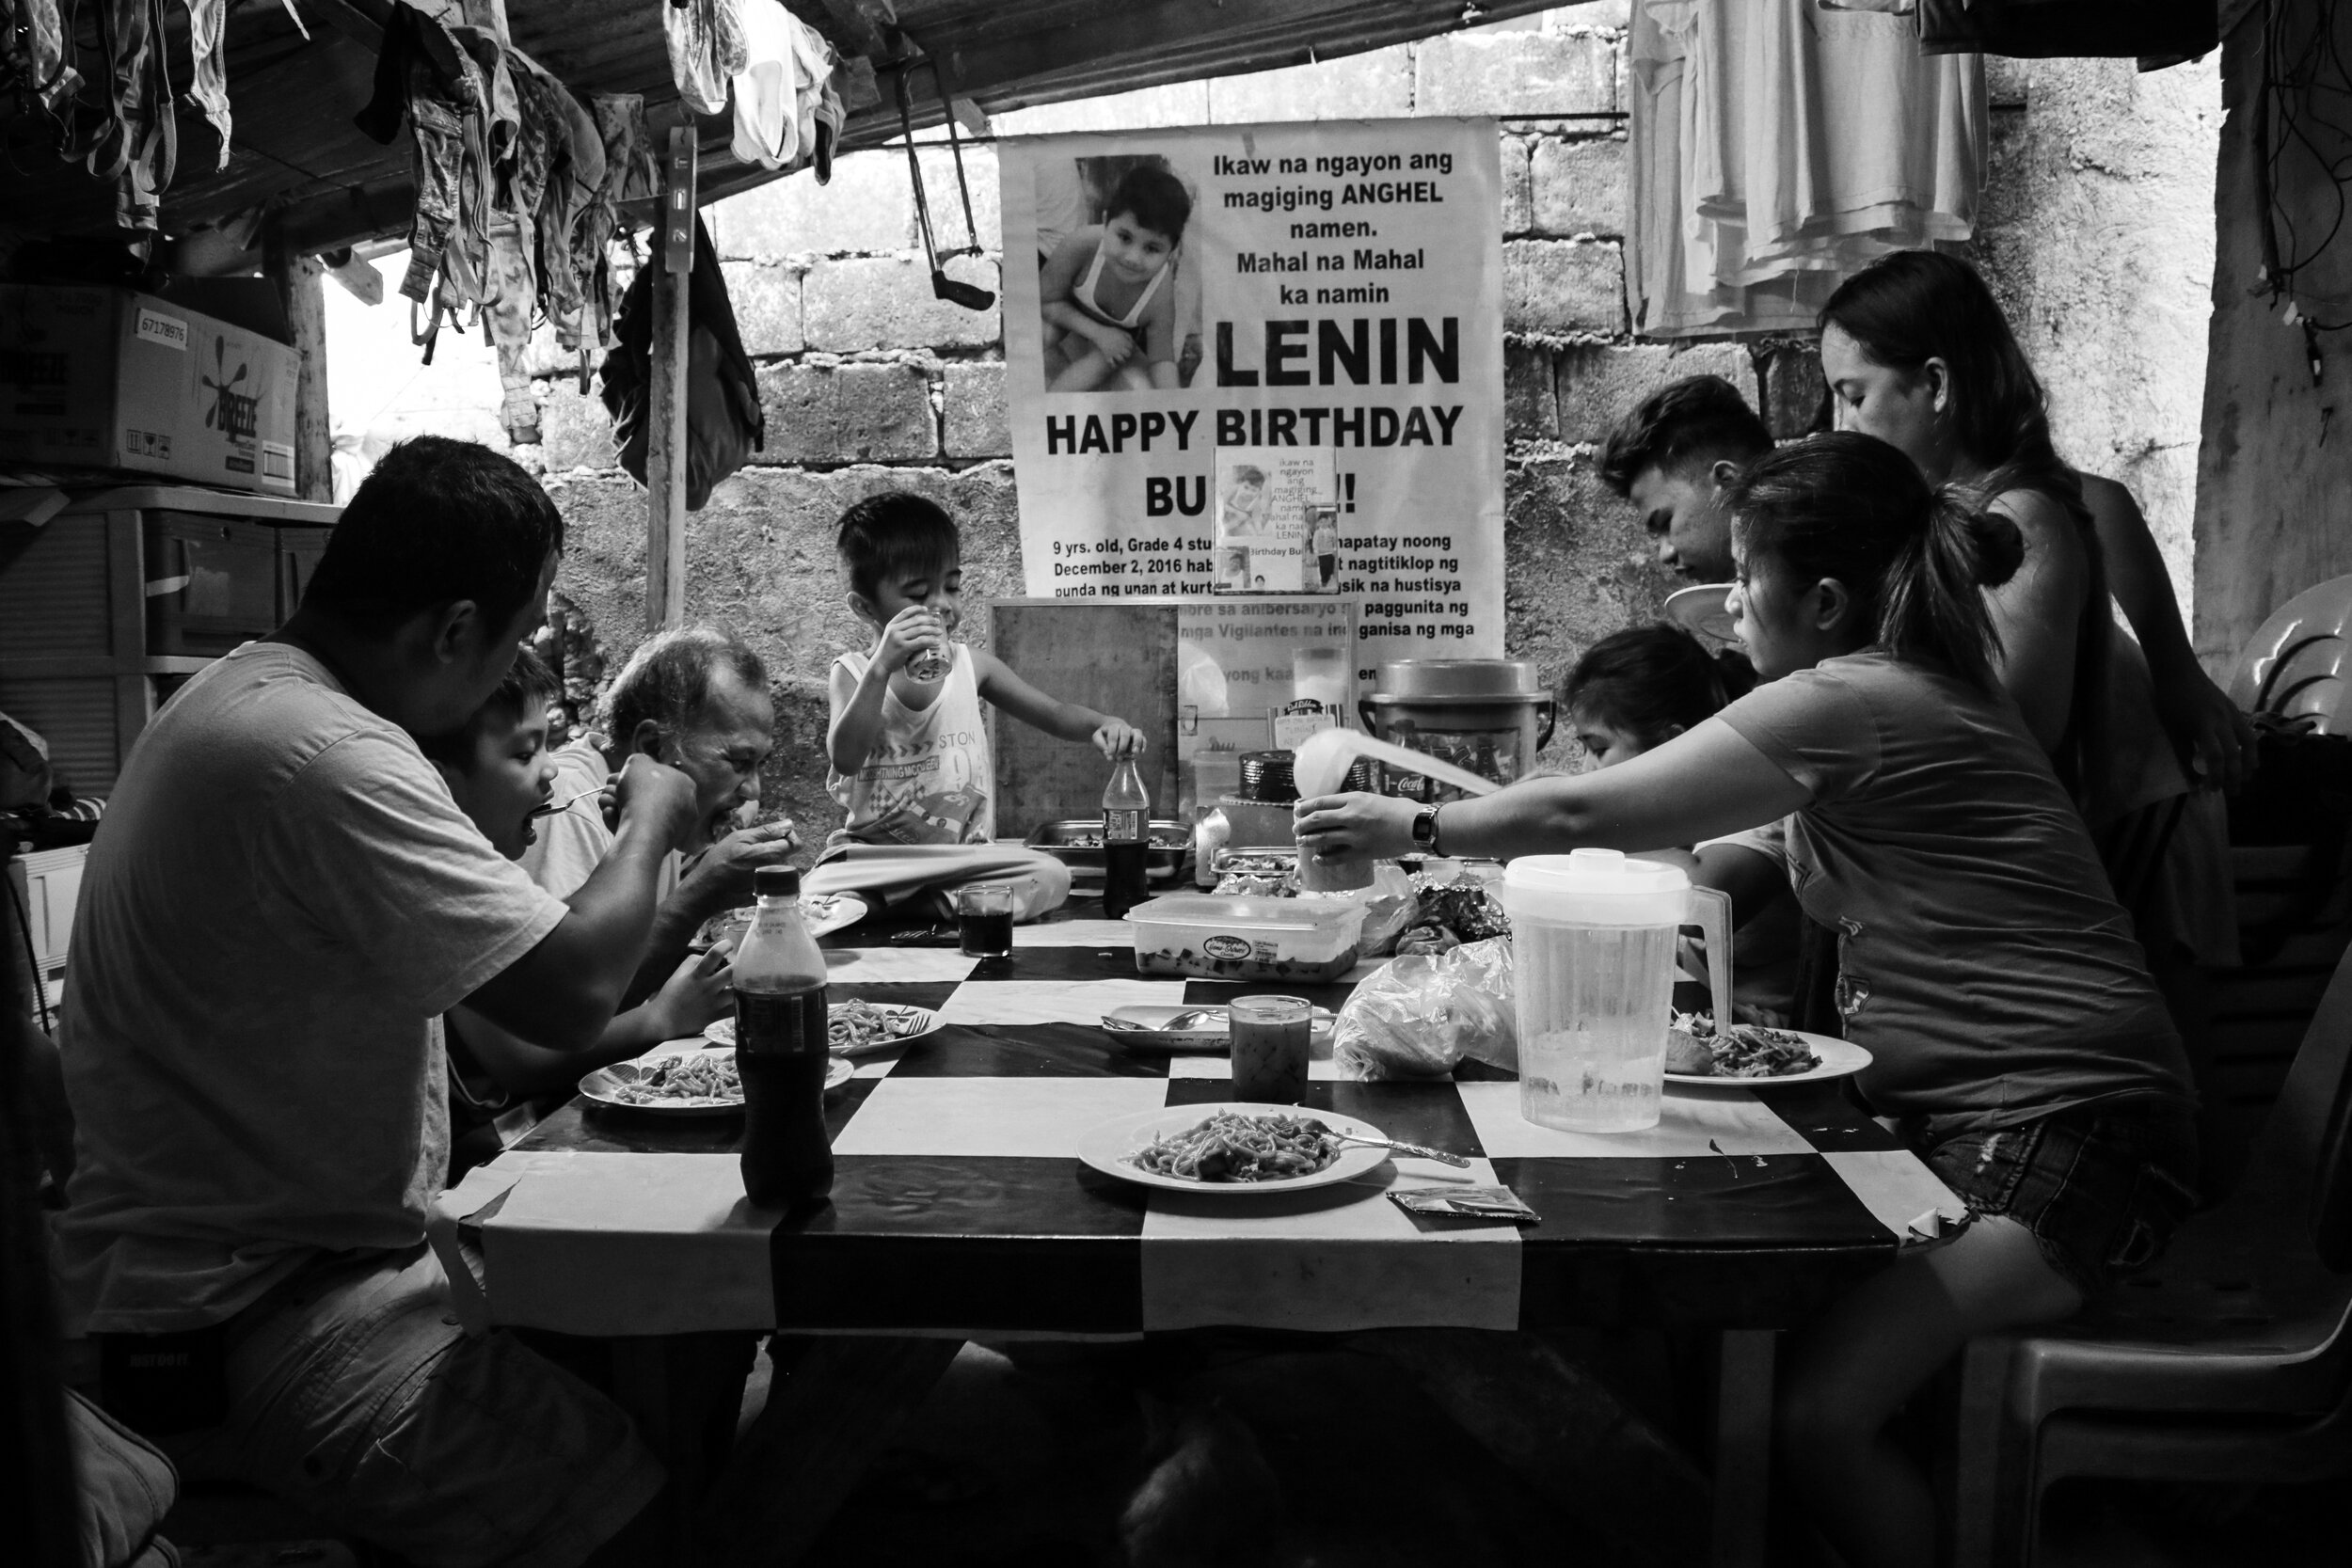   The Baylon family celebrates Lenin’s 13th birthday on Dec. 5, 2019. On this day, the family also marked the first court hearing for the petition to correct Lenin’s falsified death certificate.     The following year, the court denied the petition, 